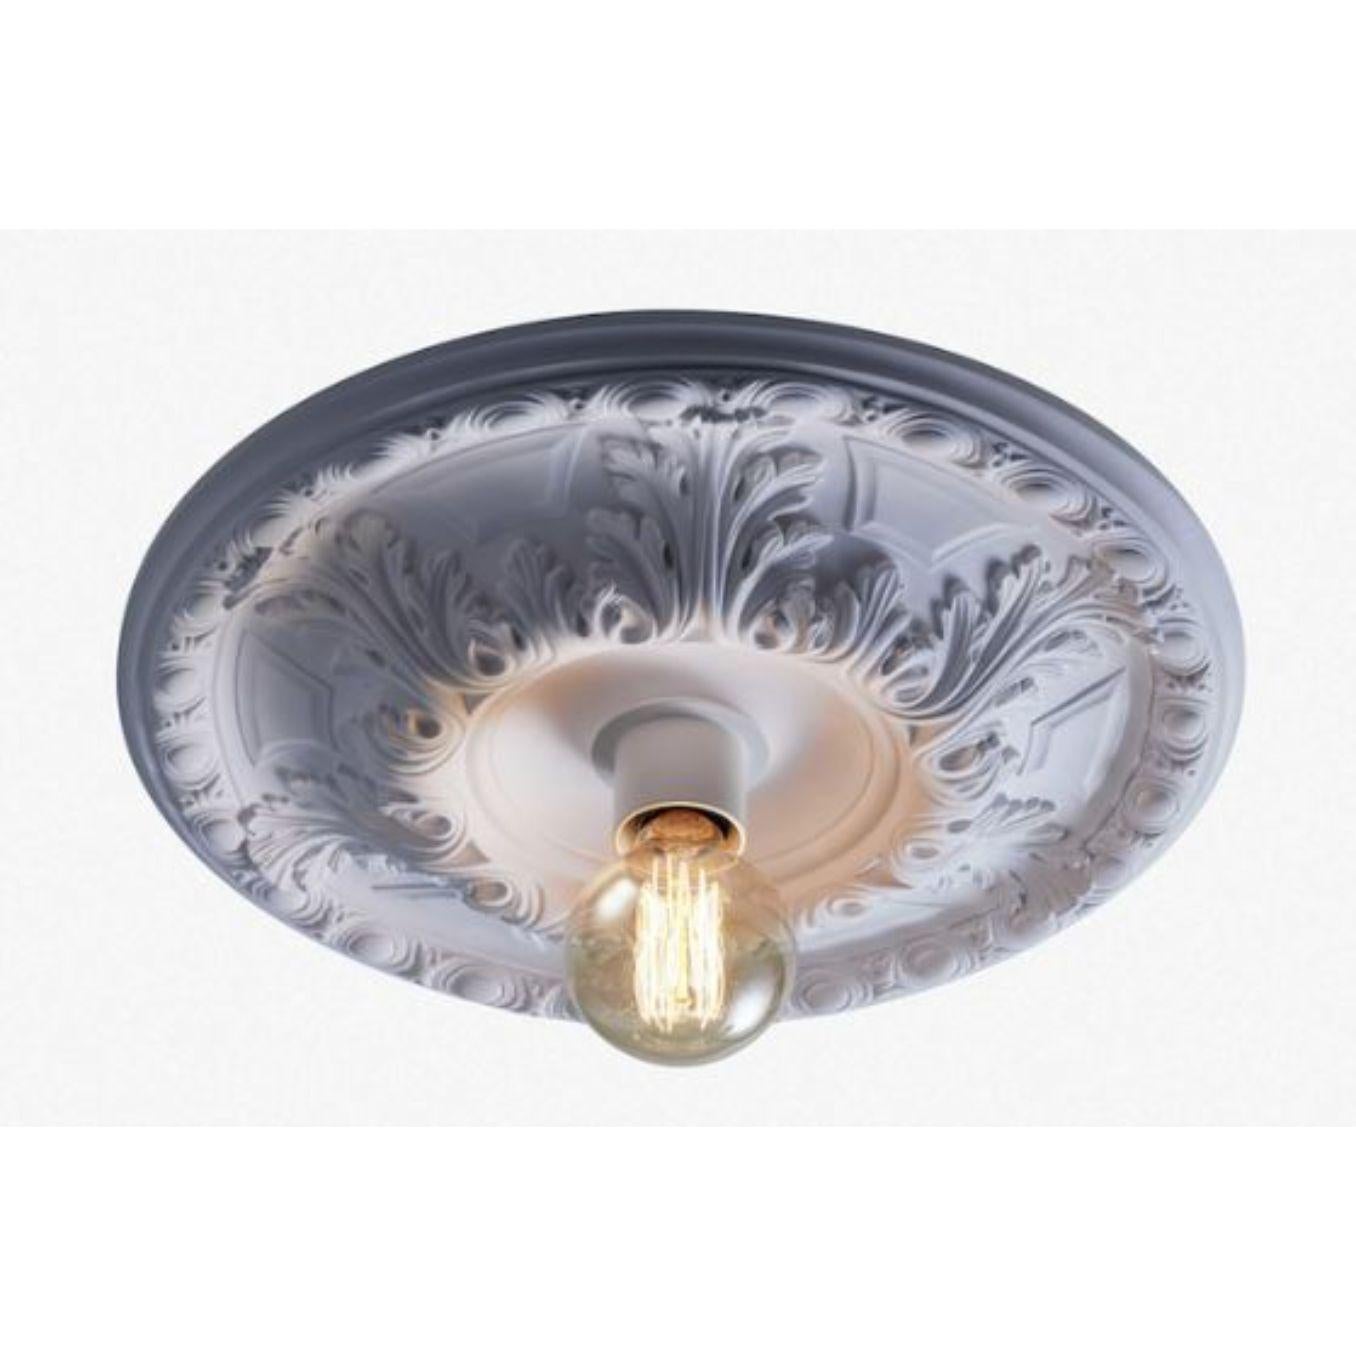 French Large Solferino Ceiling Light by Radar For Sale